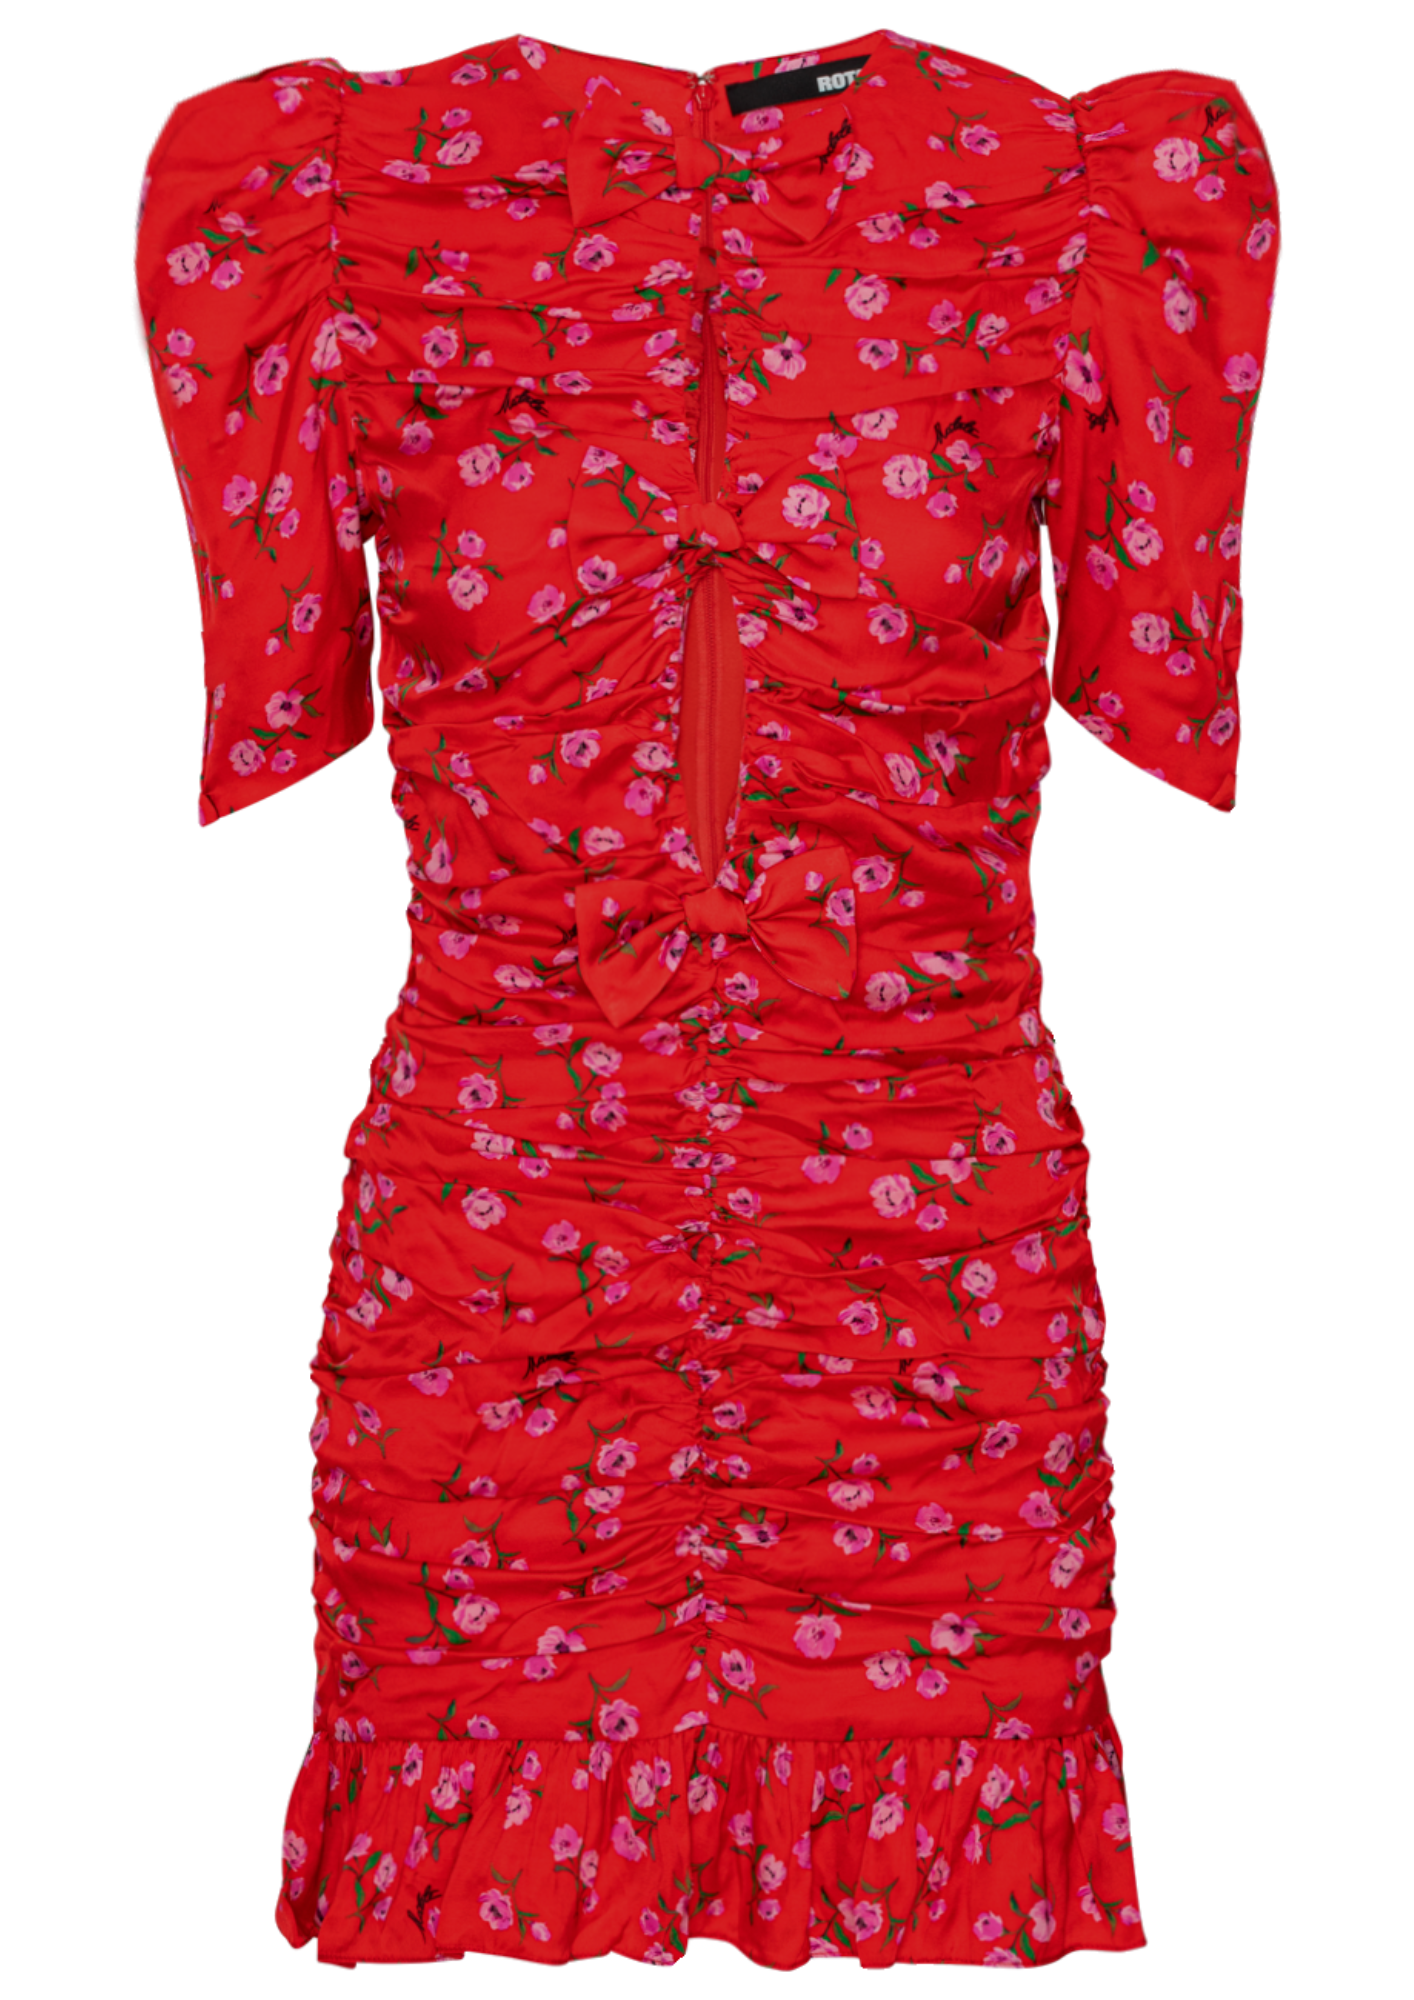 Printed Mini Ruffle Dress - Wildeve Cluster + High
Risk Red Comb